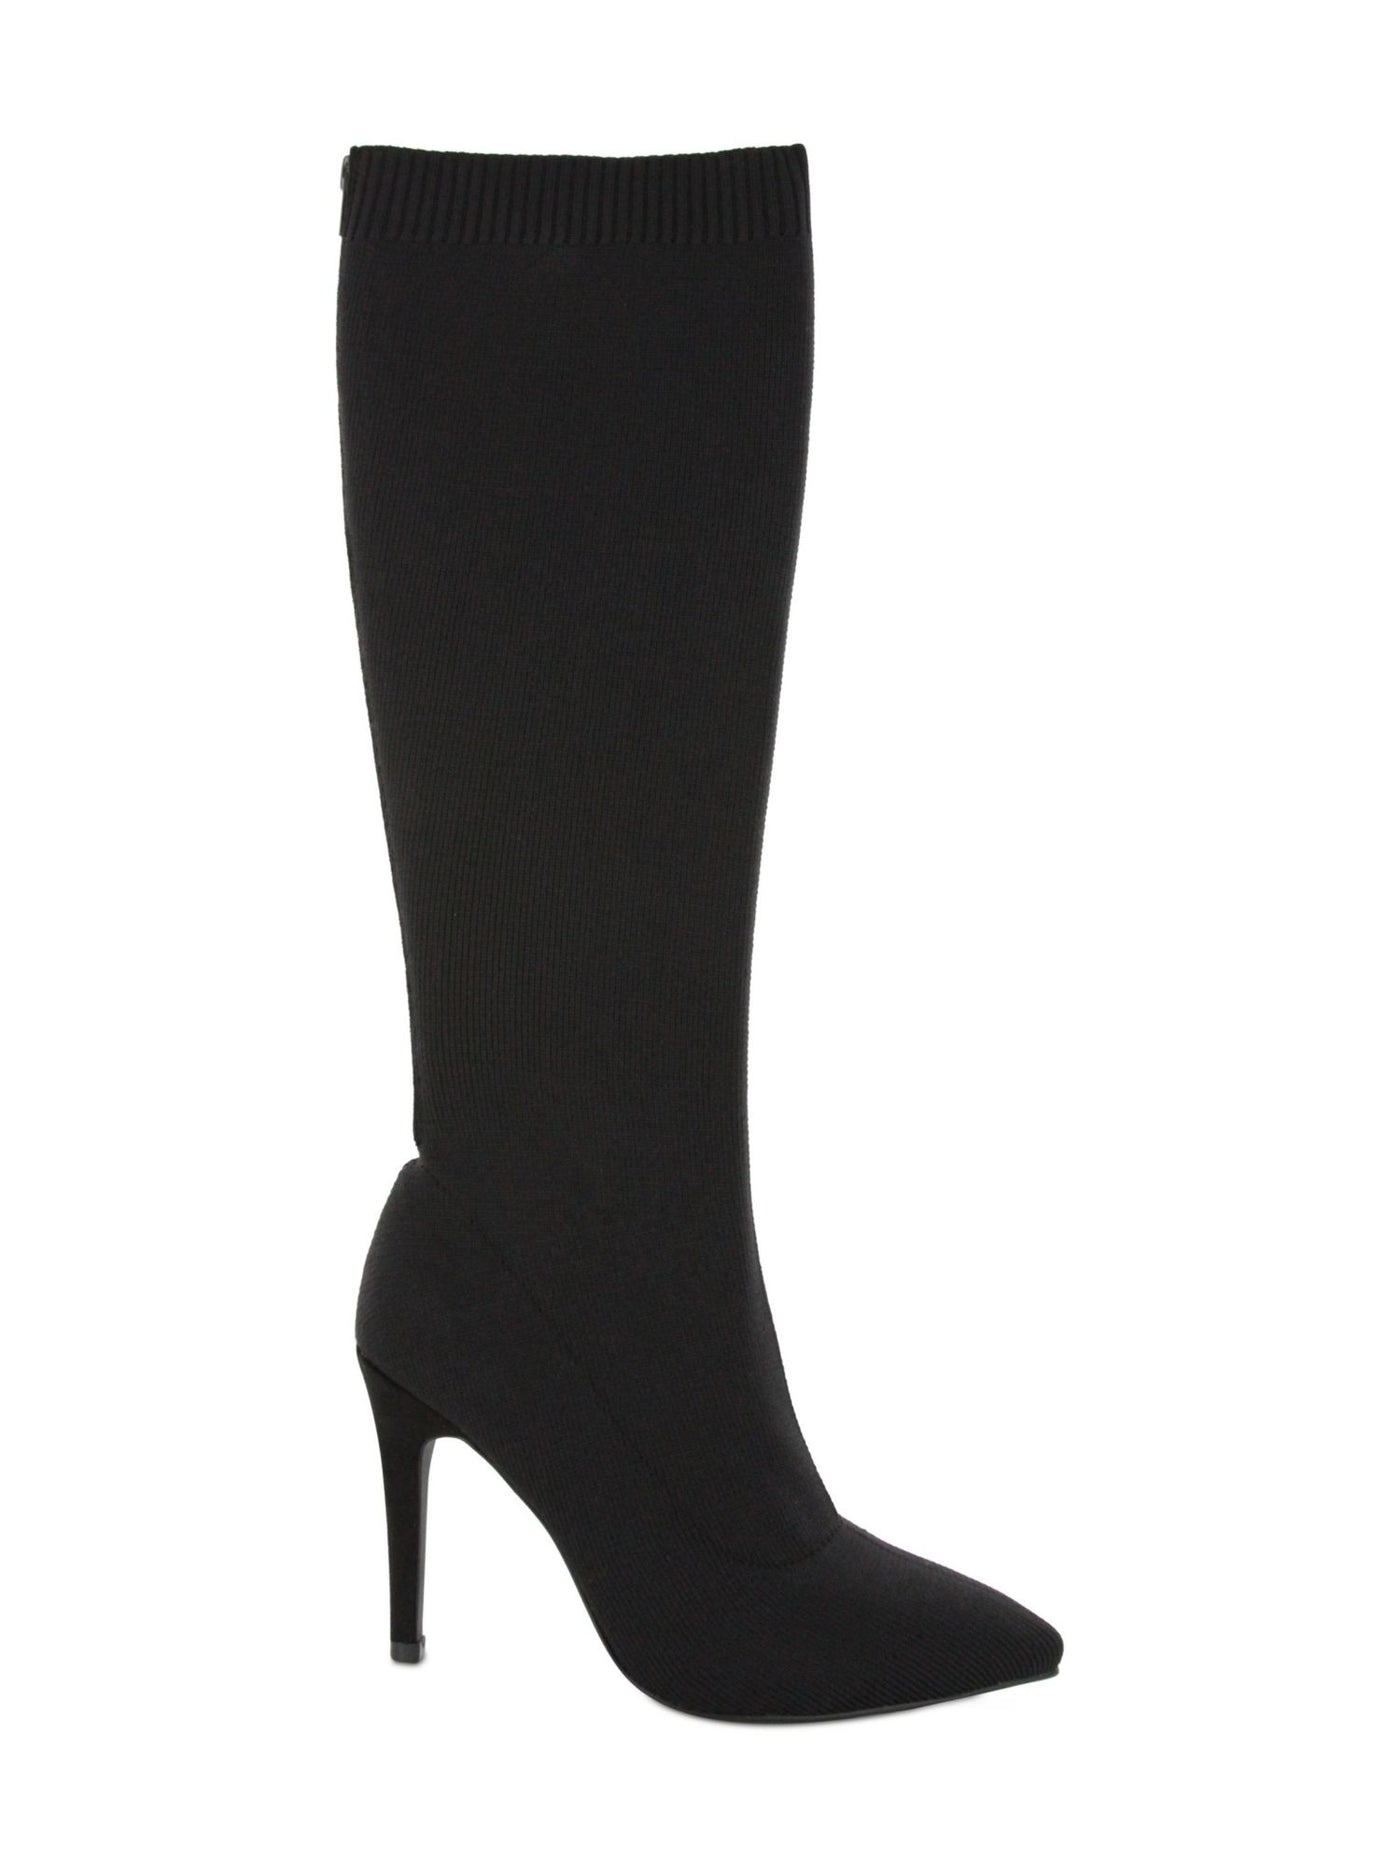 MIA Womens Black Cushioned Meredith Pointed Toe Stiletto Zip-Up Heeled Boots 7 M